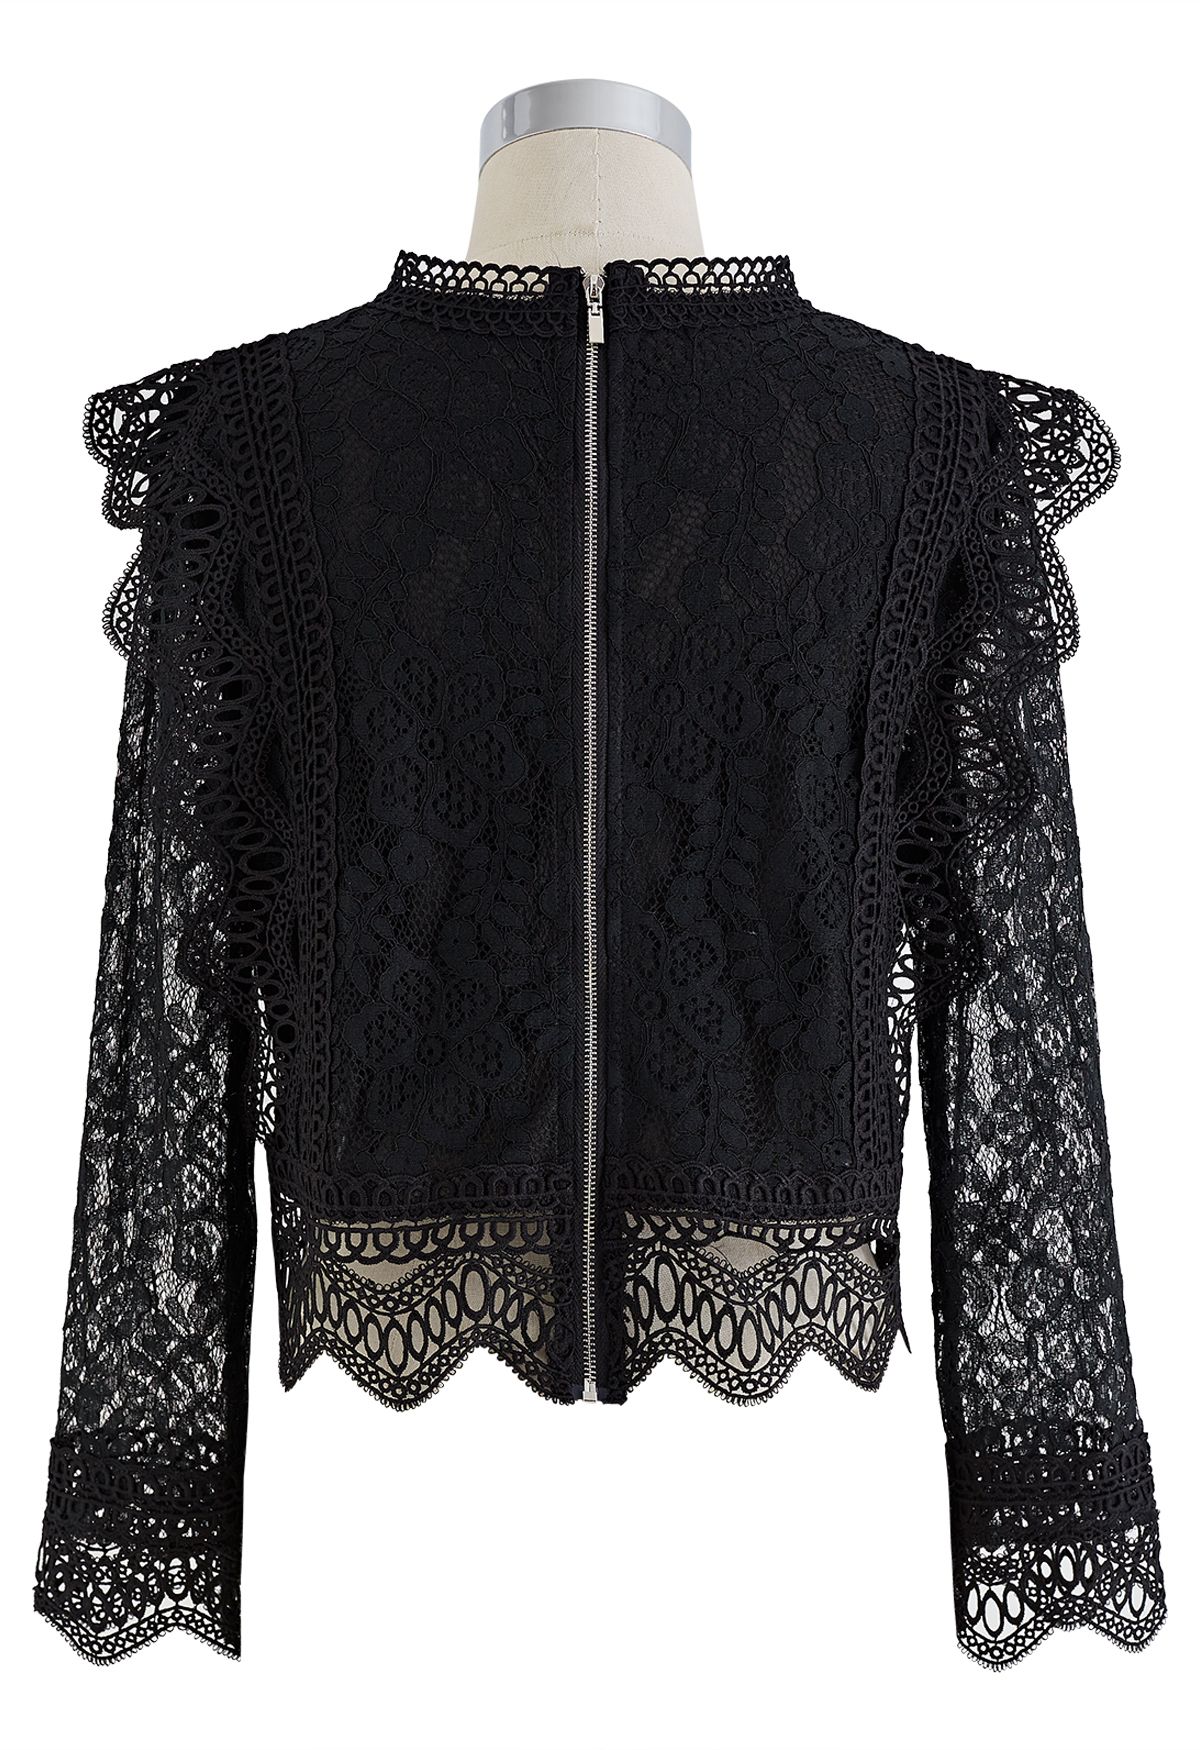 Your Sassy Start Long Sleeve Crochet Lace Top in Black